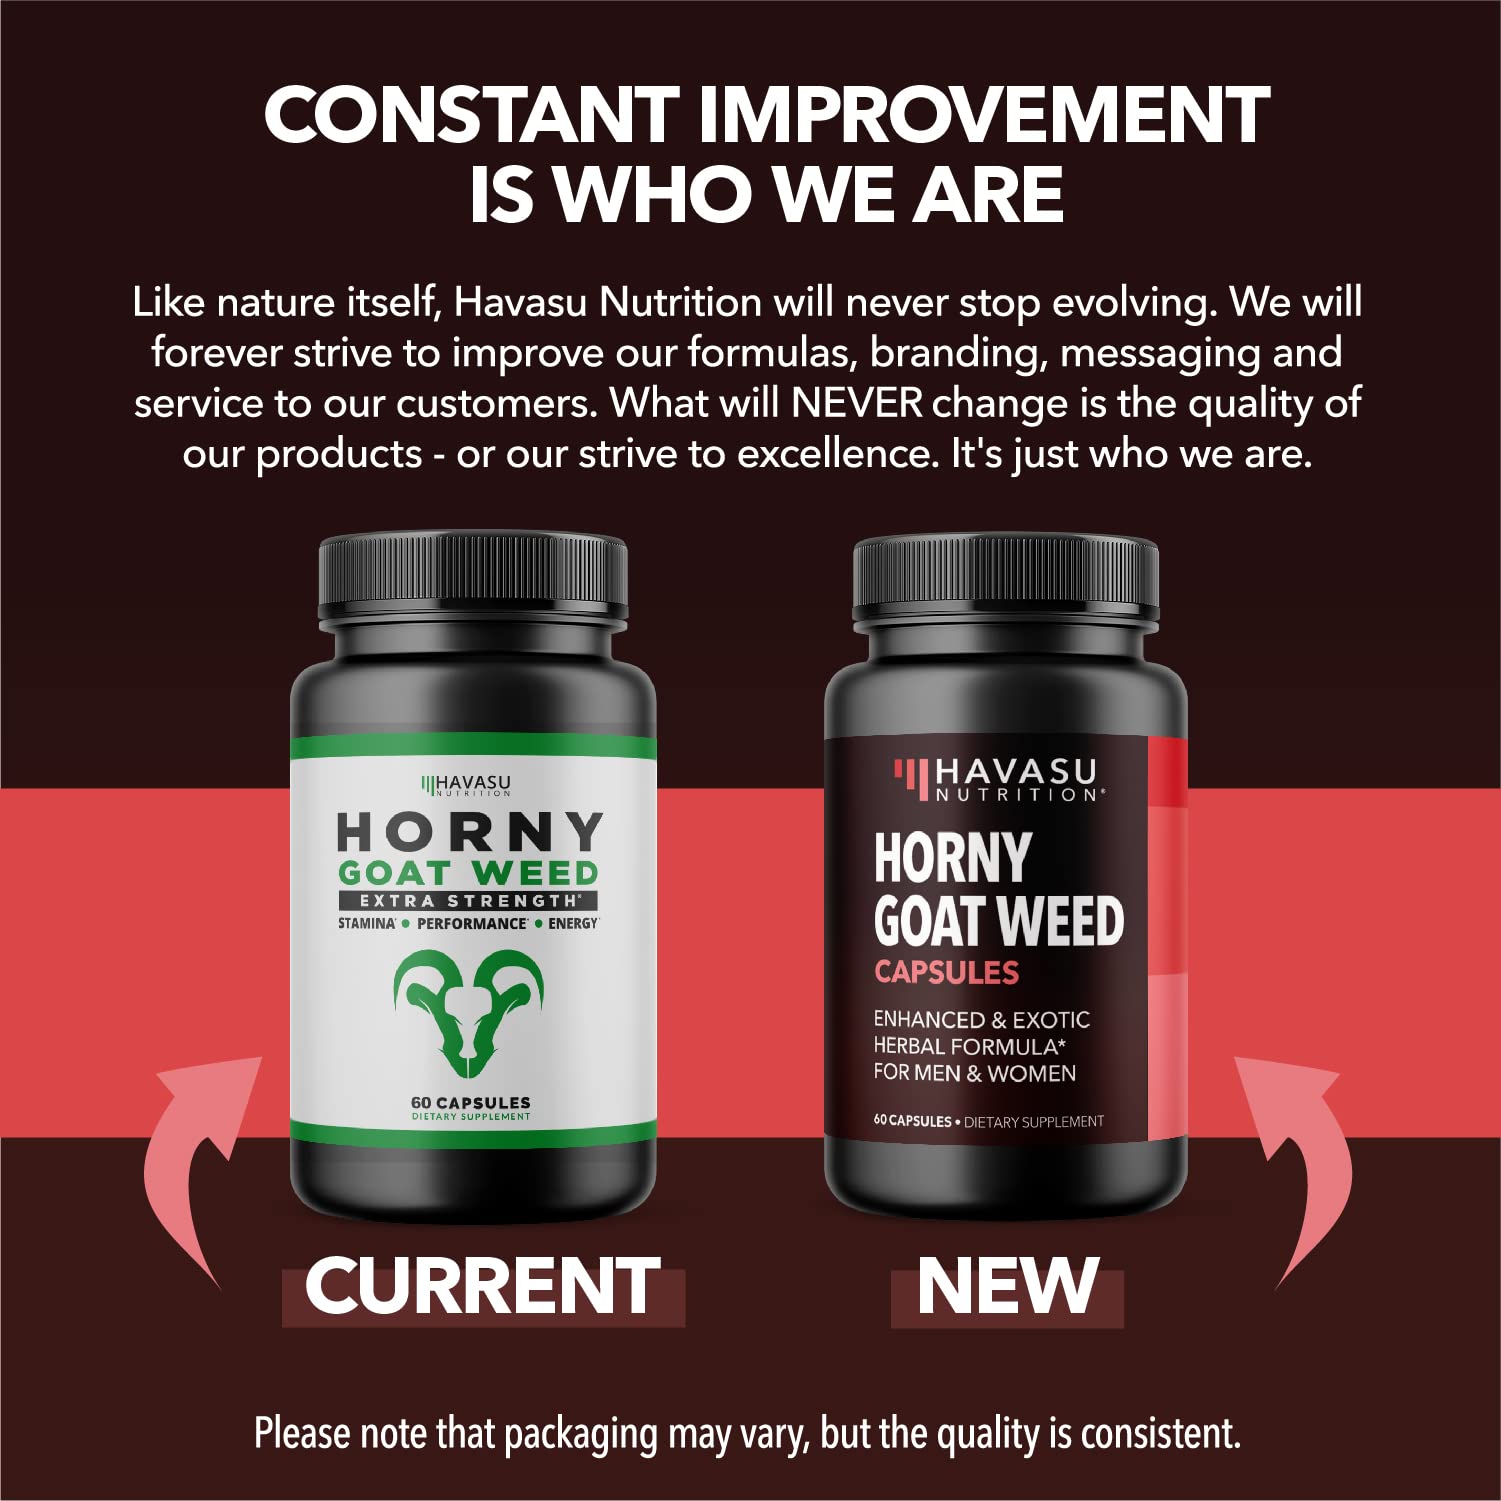 Horny Goat Weed Supplement for Him & Her | Formulated with Maca Root L-Arginine & Muira Puama for Natural Energy & Optimal Endurance